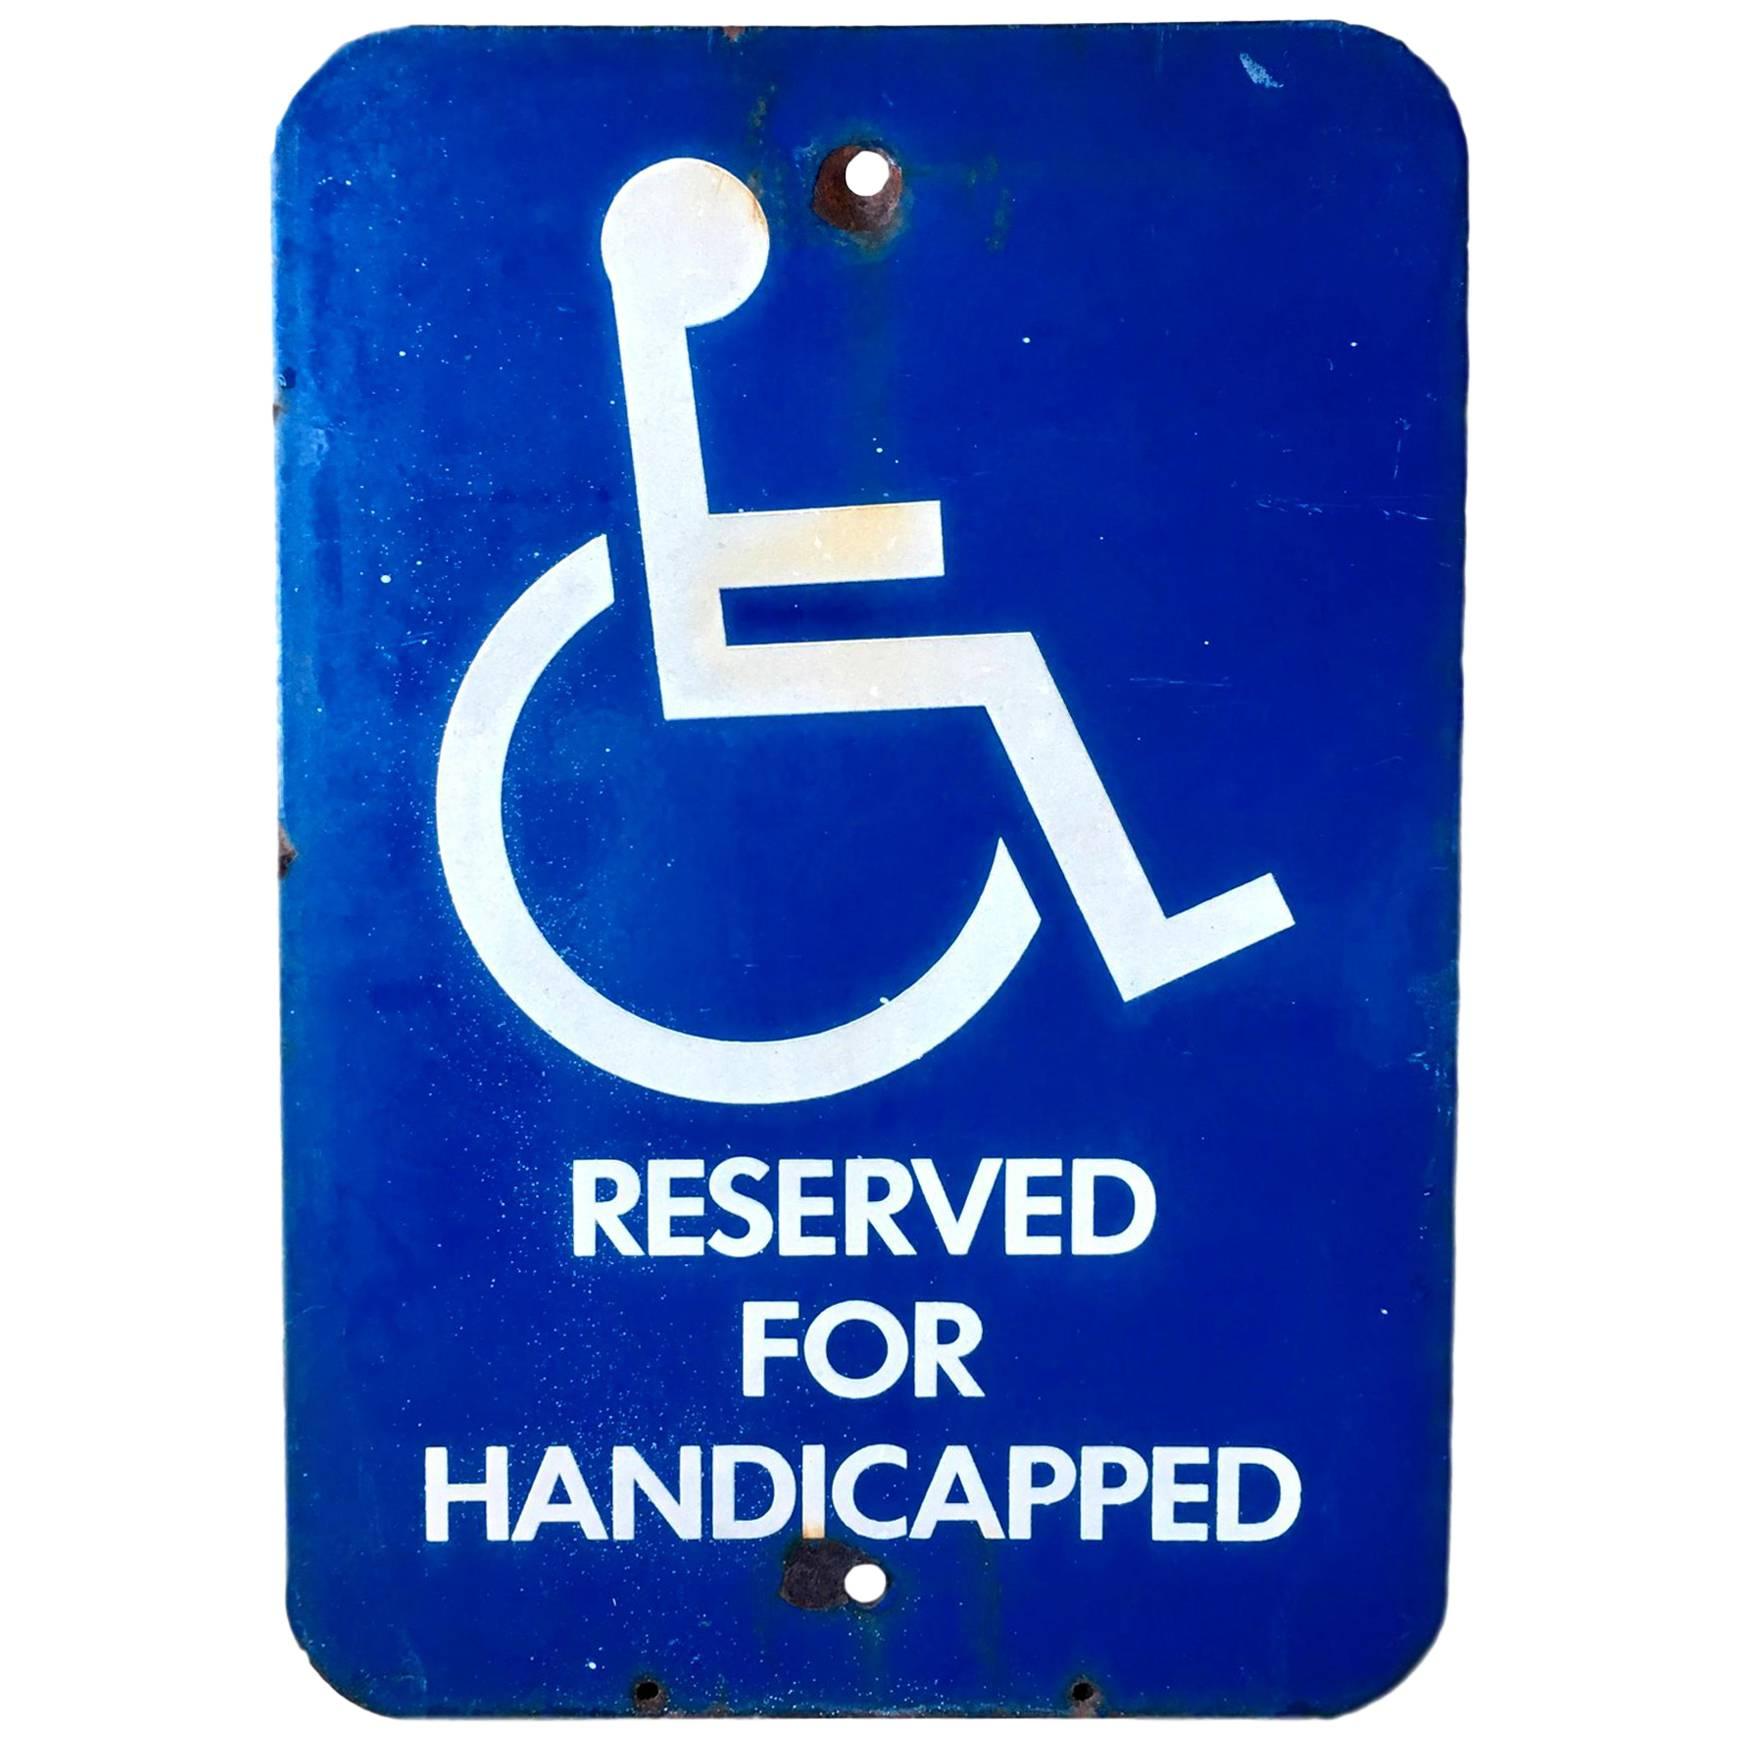 Vintage porcelain handicapped sign. Great colors. Newly framed and floating in a shadow box. Great vintage condition.